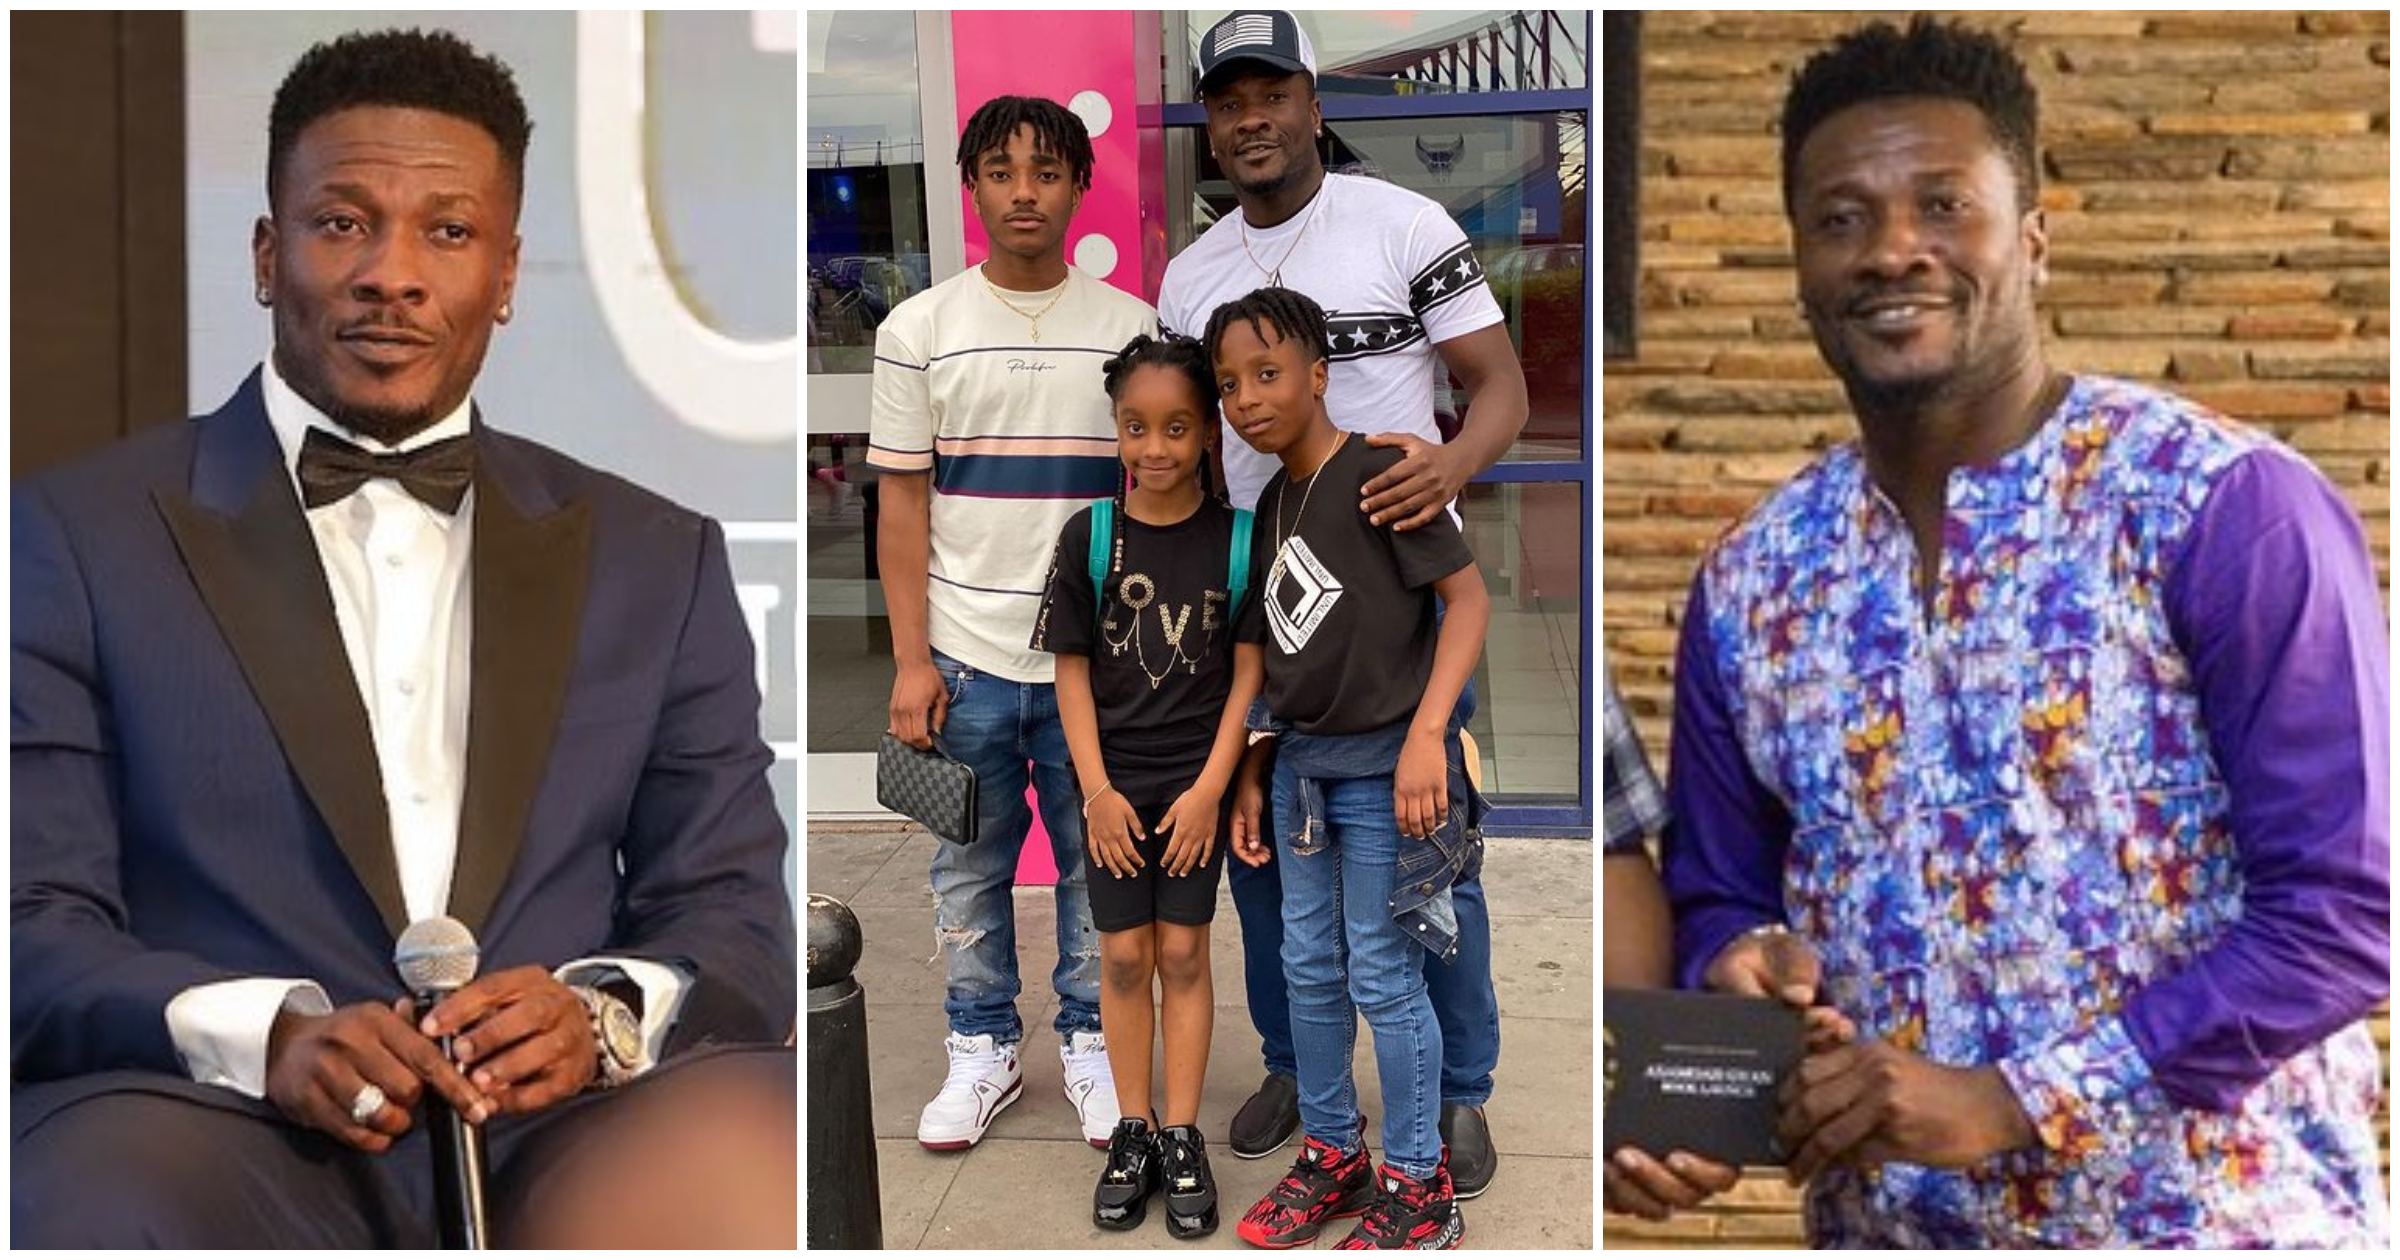 Beautiful as their mom: Asamoah Gyan celebrates Father's Day with his 3 children, lovely photos warm hearts